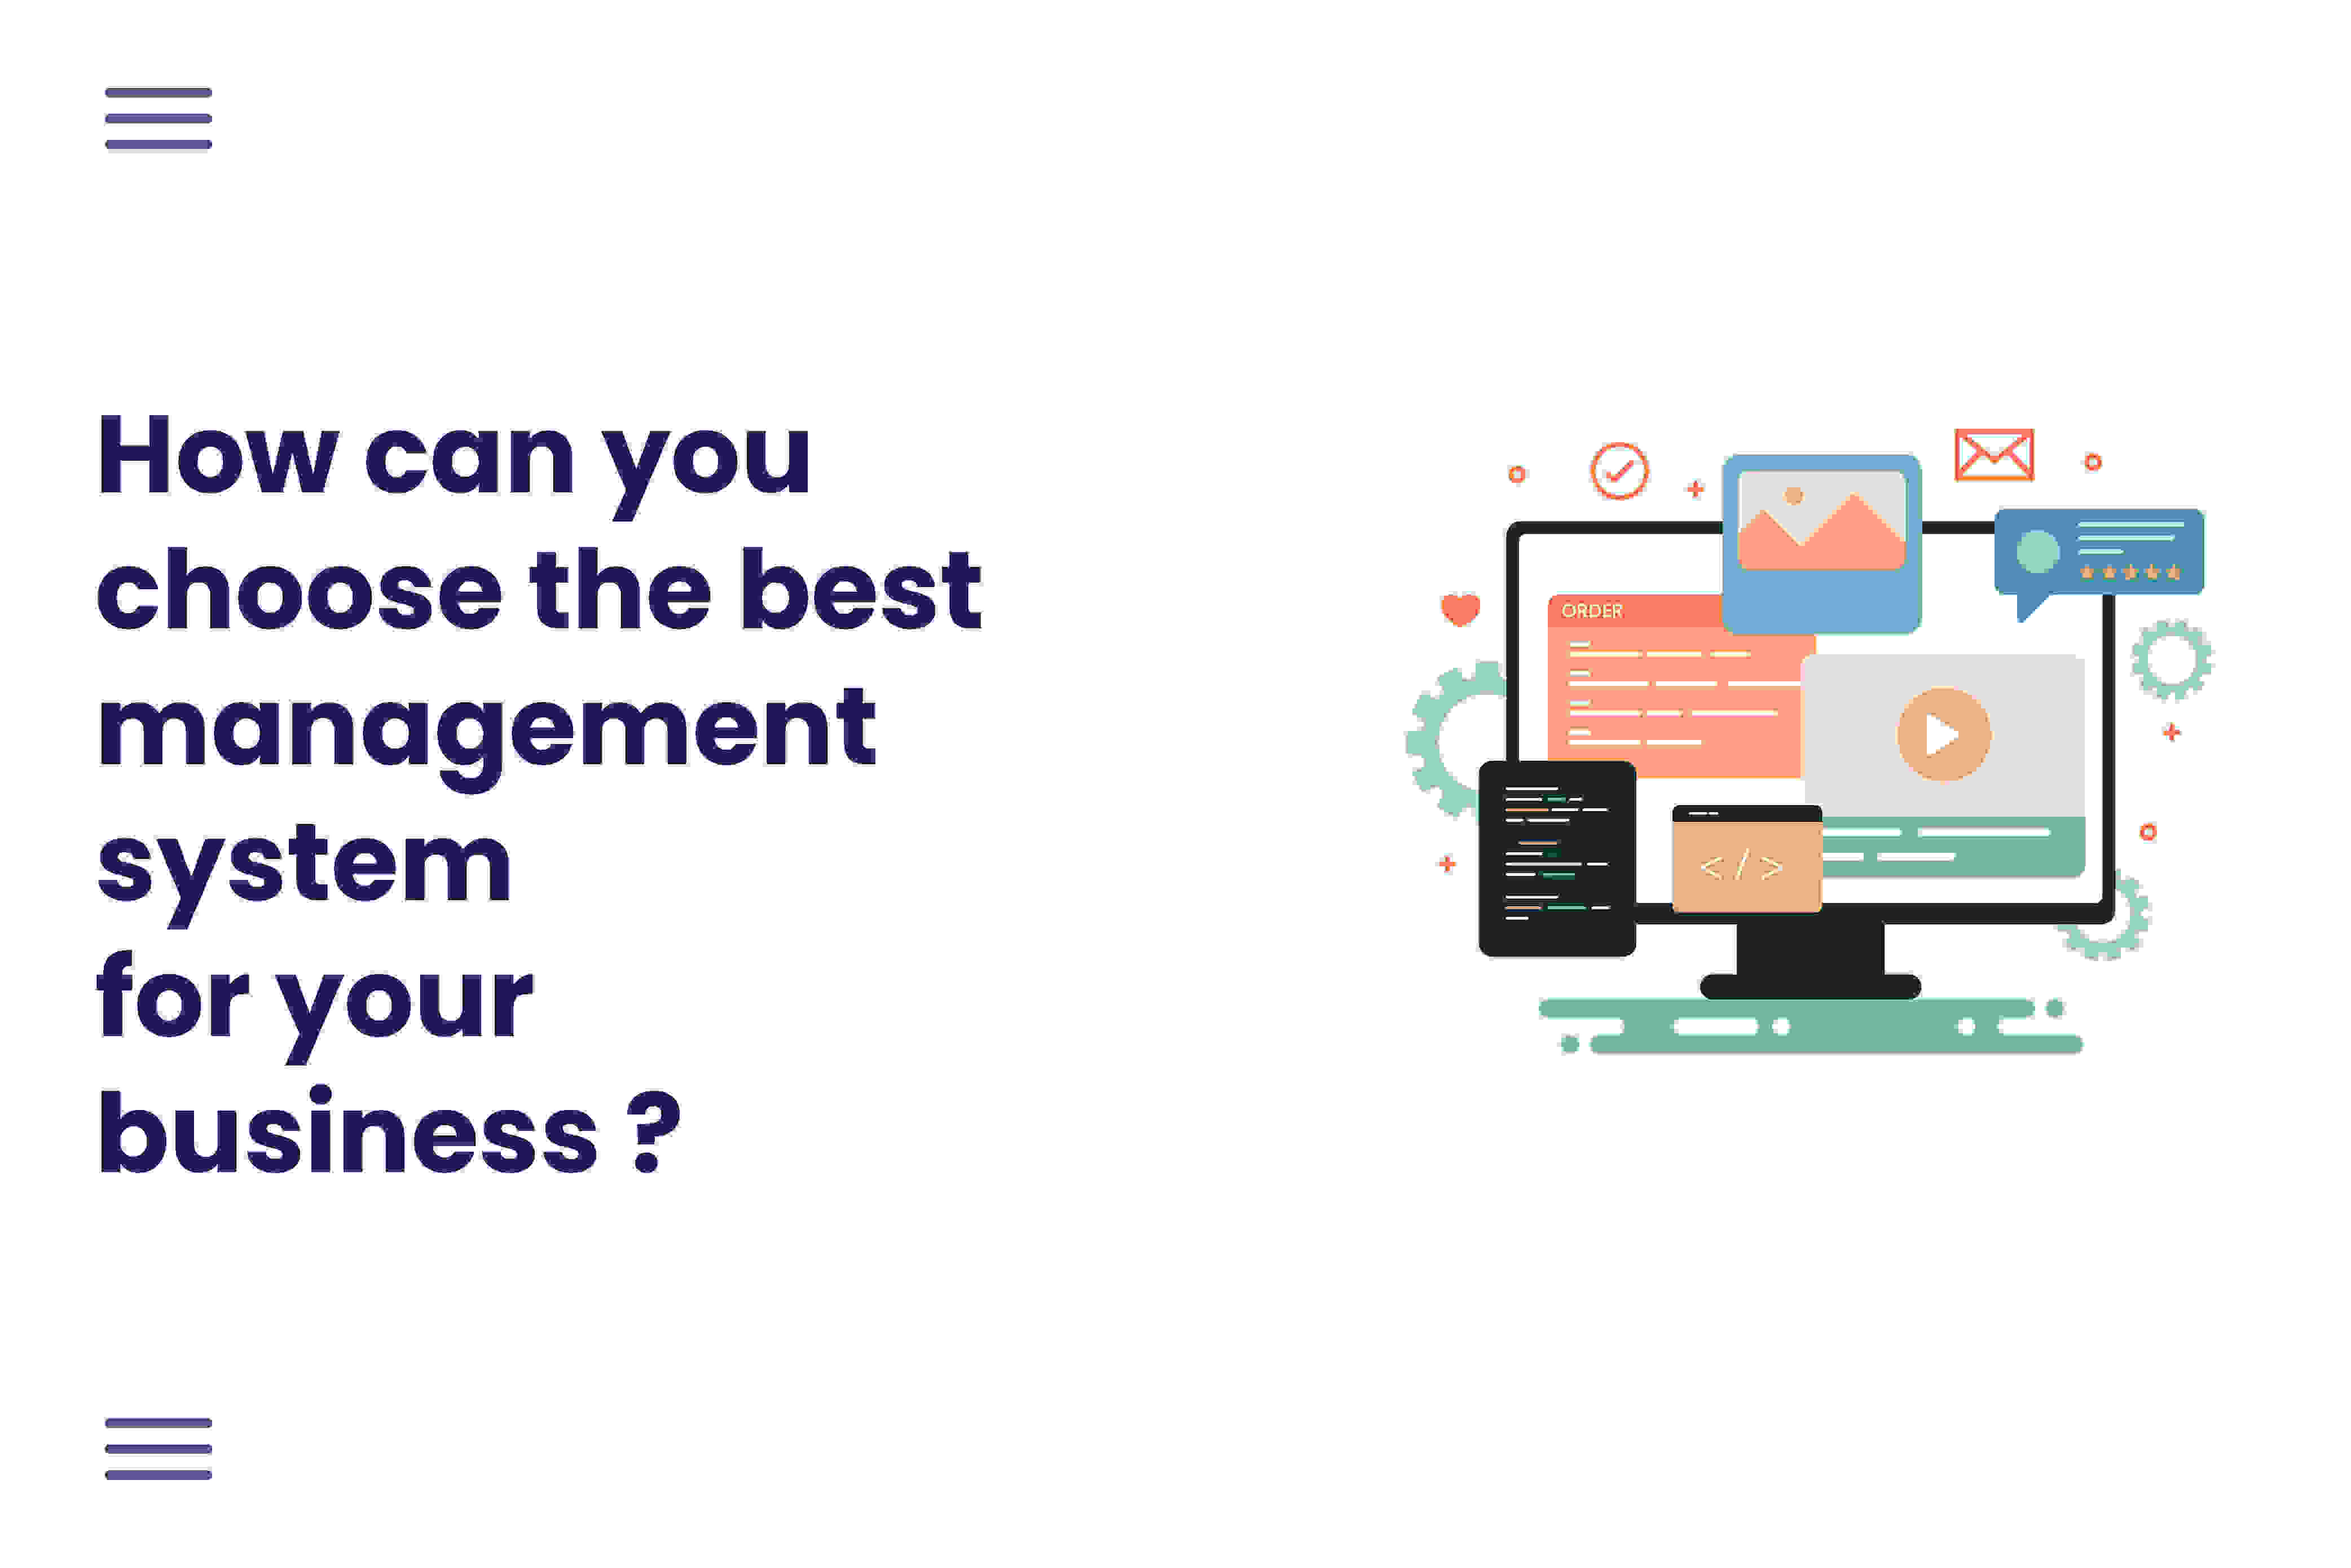 How can you choose the best management system for your business? 